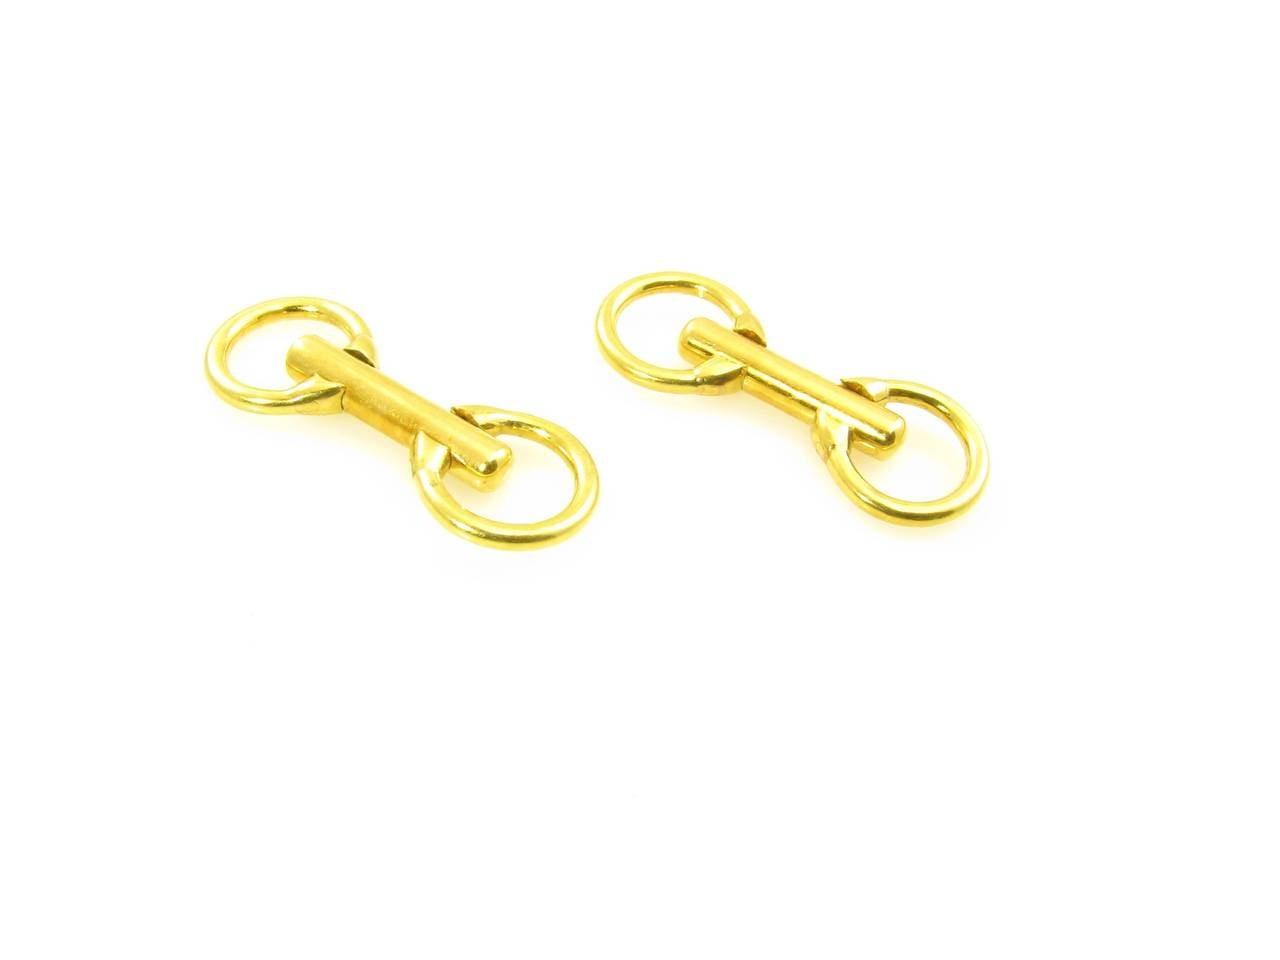 Women's Gold Double Ring Style Cufflinks